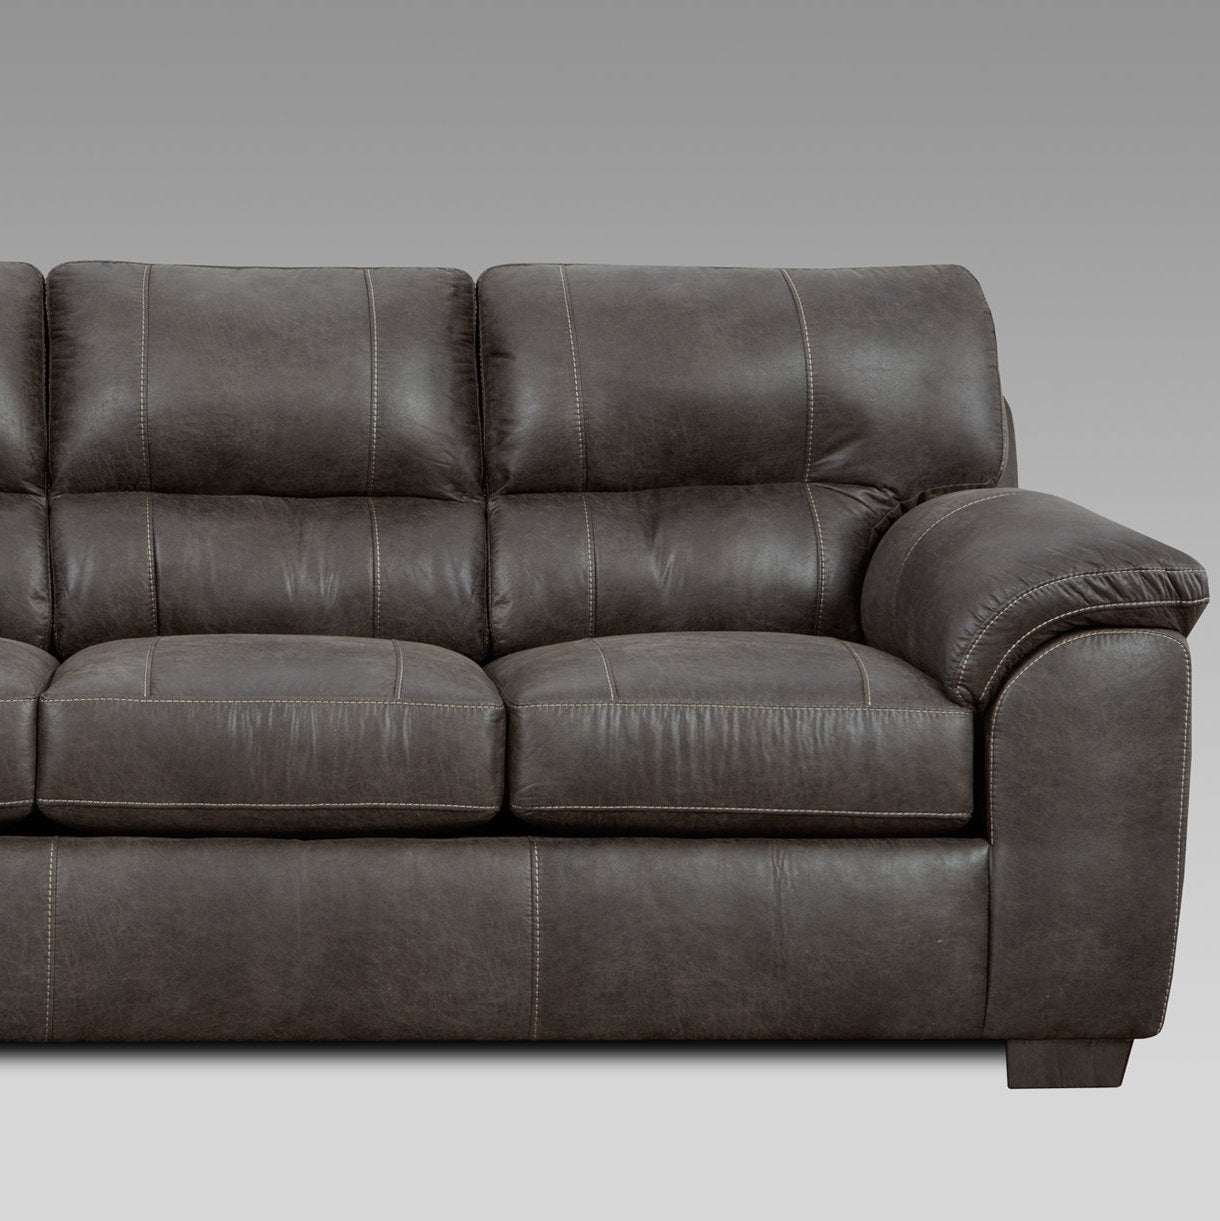 Tirana Contemporary Fabric Pillow-top Arm Sectional Sofa with Ottoman in Sequoia Ash